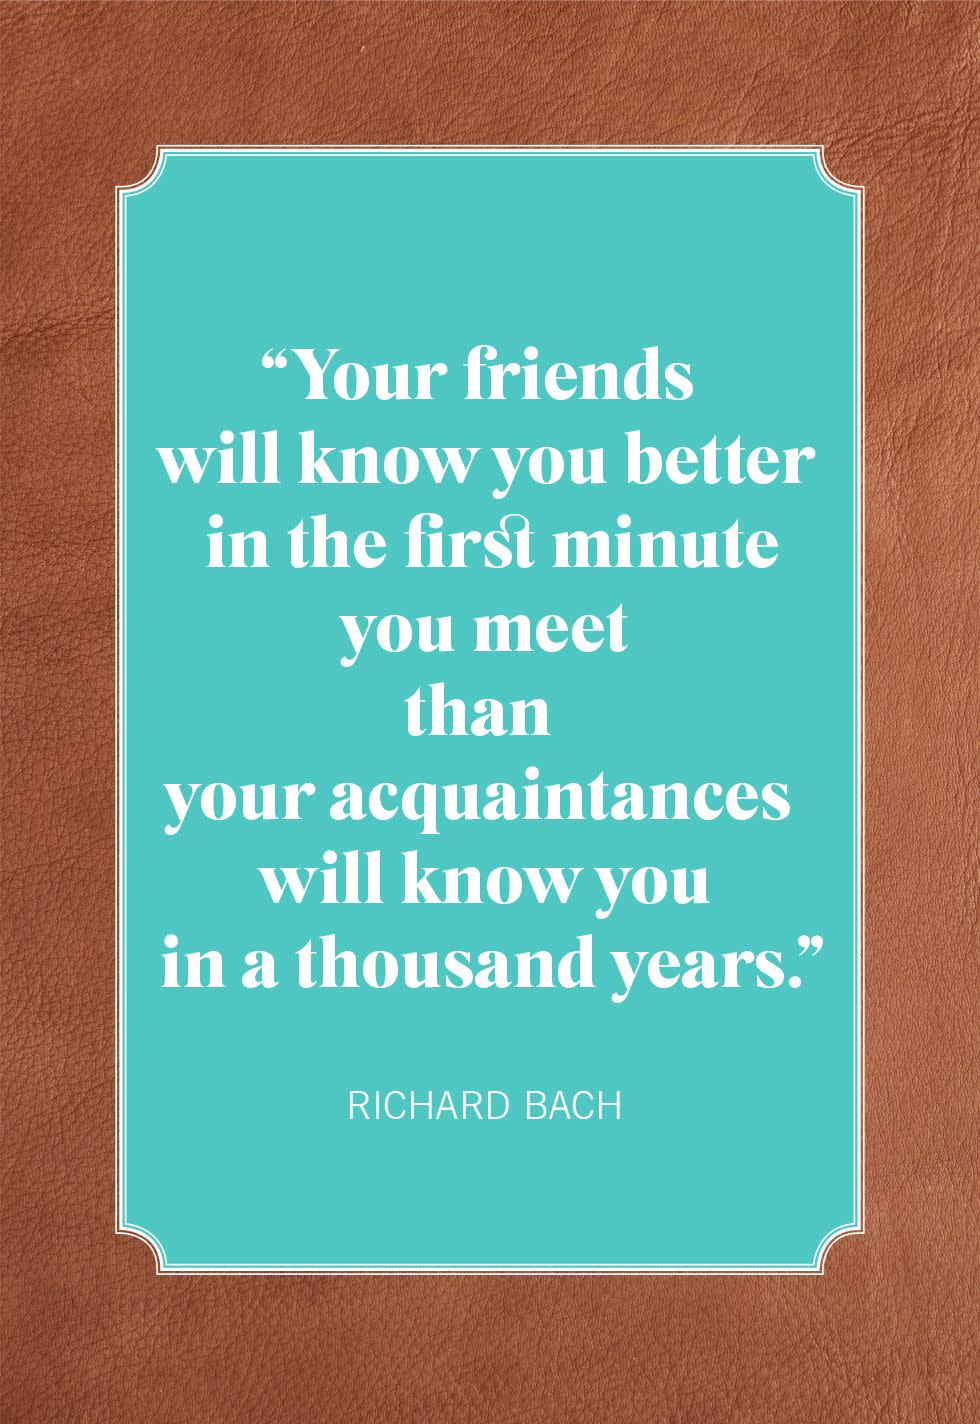 richard bach valentines day quotes for friends